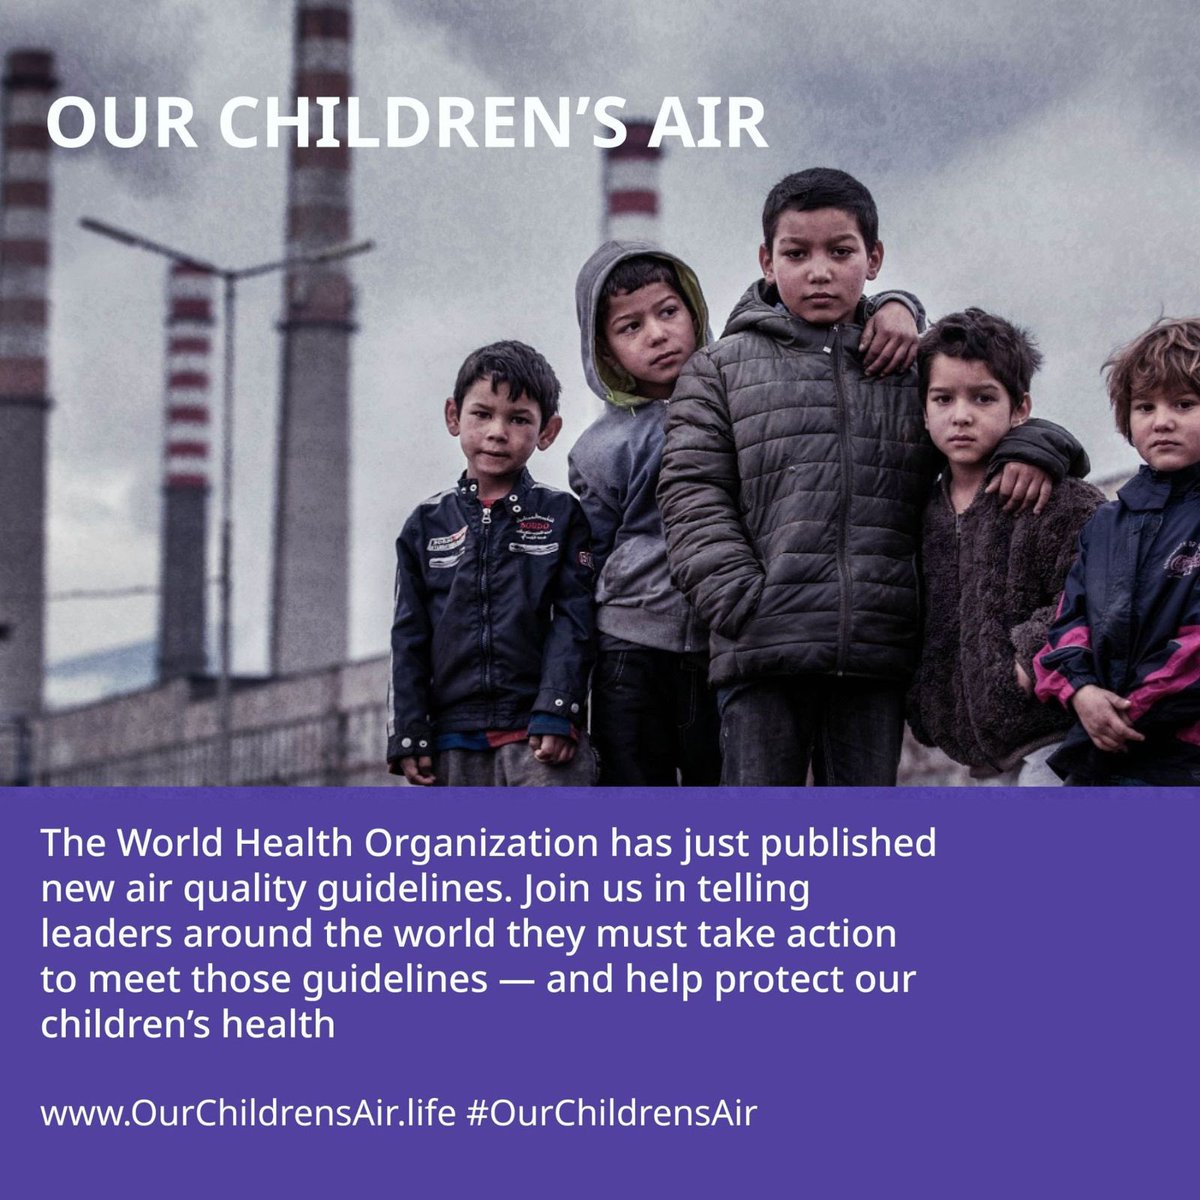 A new @UNICEF report shows that impacts of climate change - including air pollution from the burning of fossil fuels - is putting a billion children at risk;

Tell your child's story at Our Children's Air: 
ourchildrensair.life
@WHO #OurChildrensAir